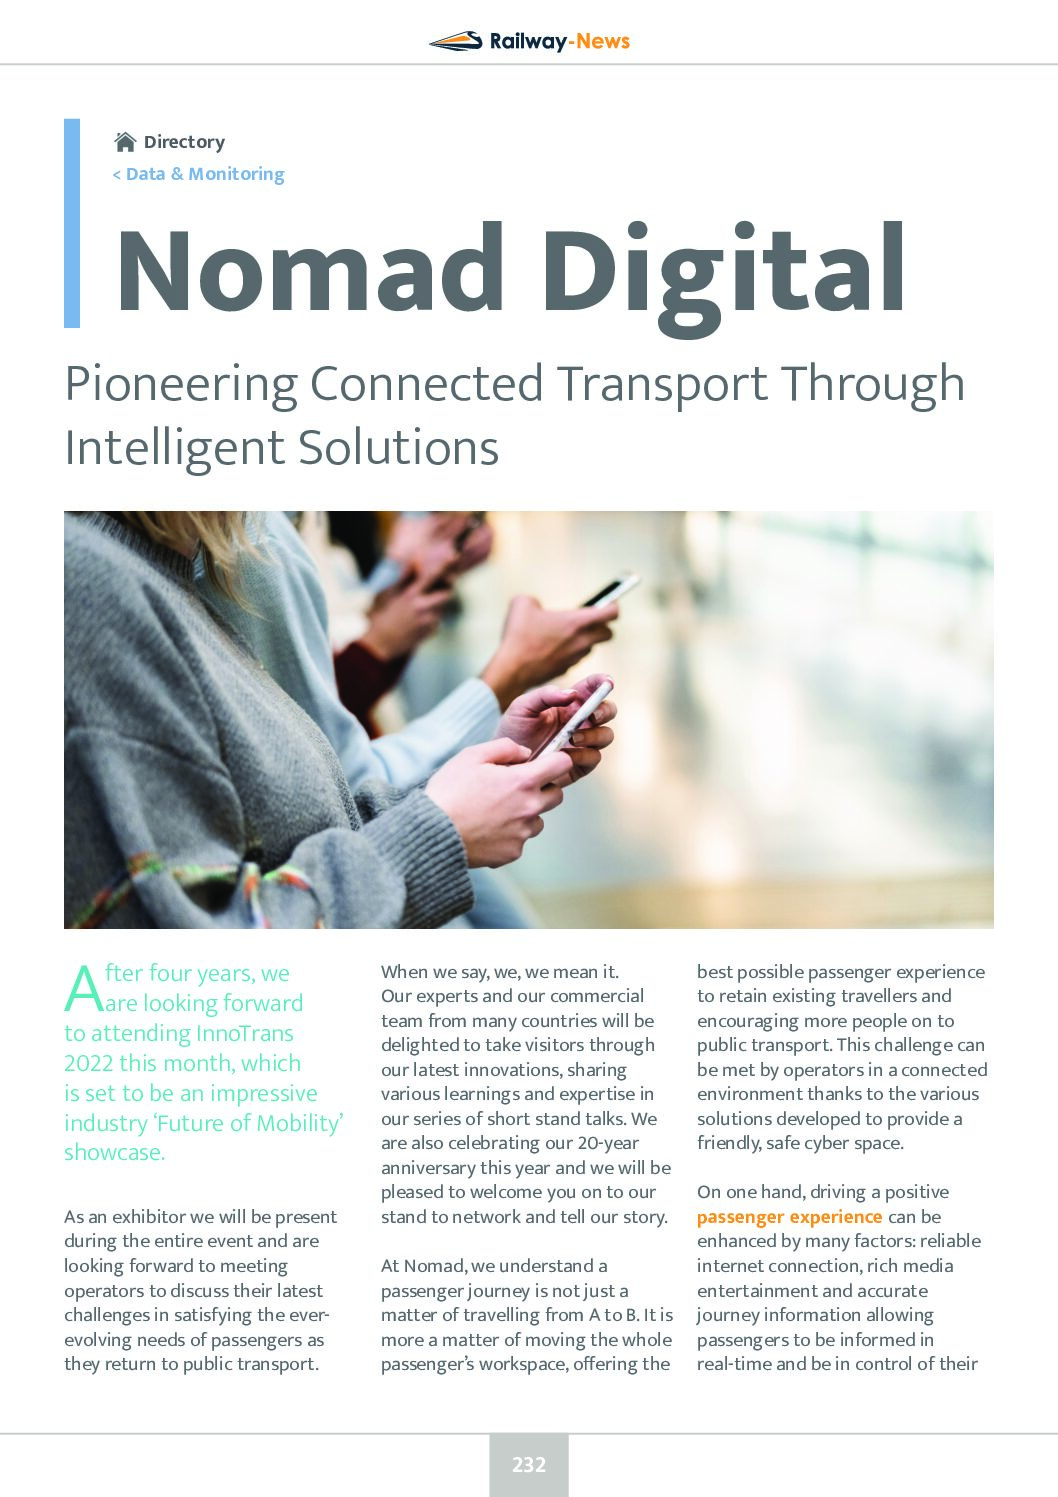 Pioneering Connected Transport Through Intelligent Solutions